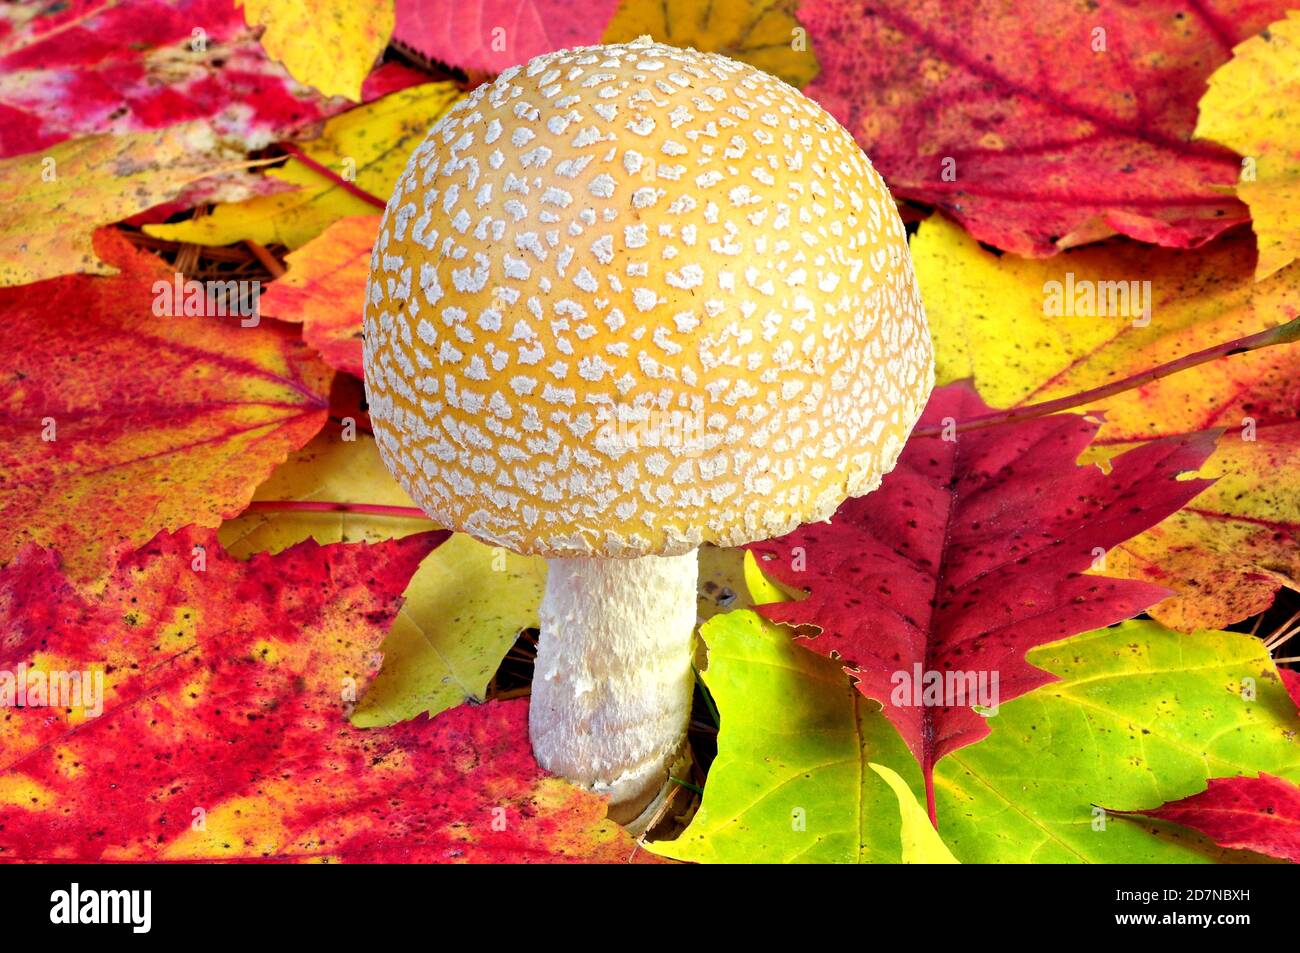 Closeup of yellow and white-spotted American Fly Agaric mushroom (Amanita muscaria) growing among colorful autumn leaves. Stock Photo